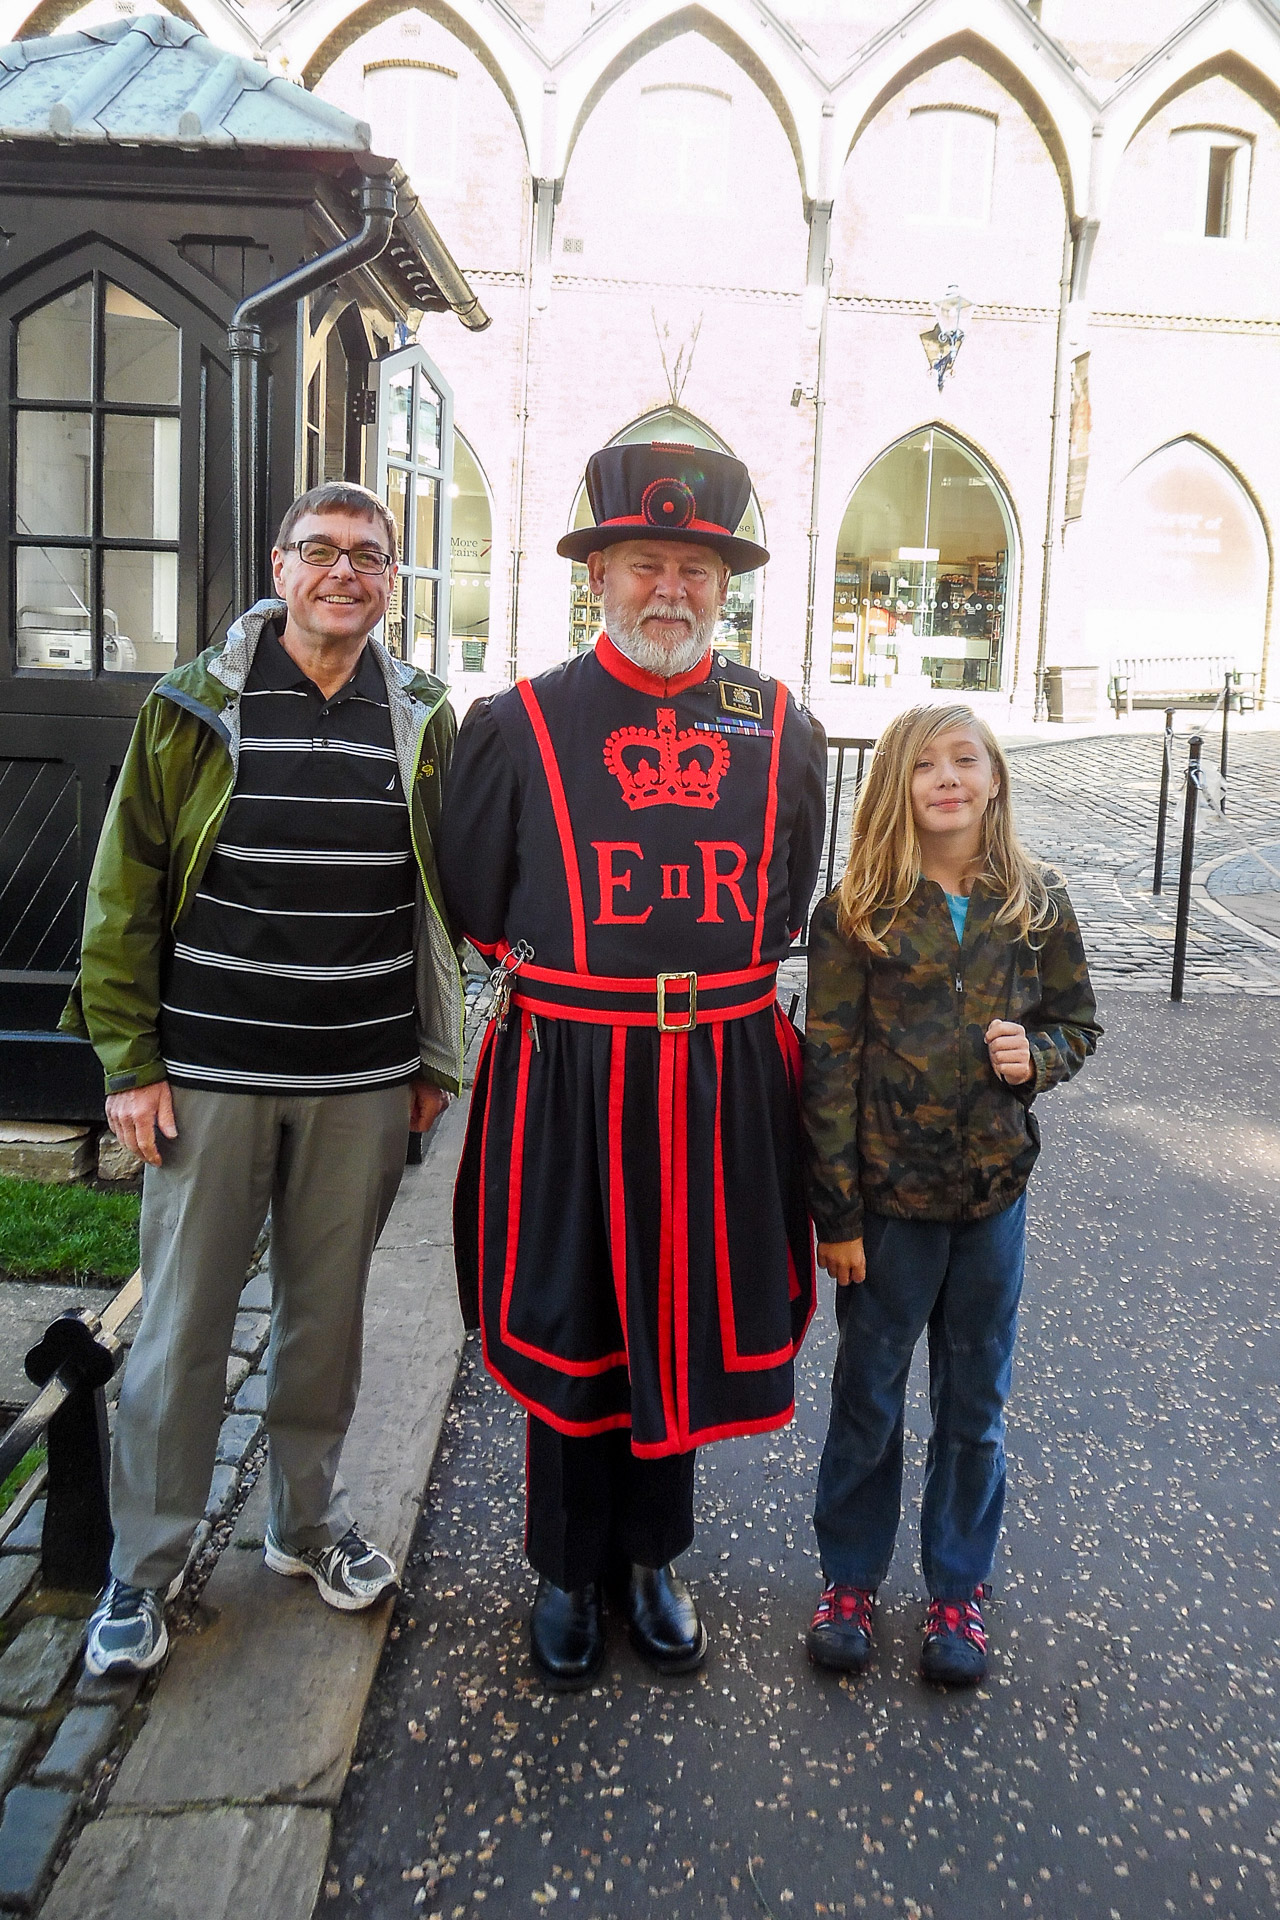 Peter and Kyle with Beefeater at the Tower of London